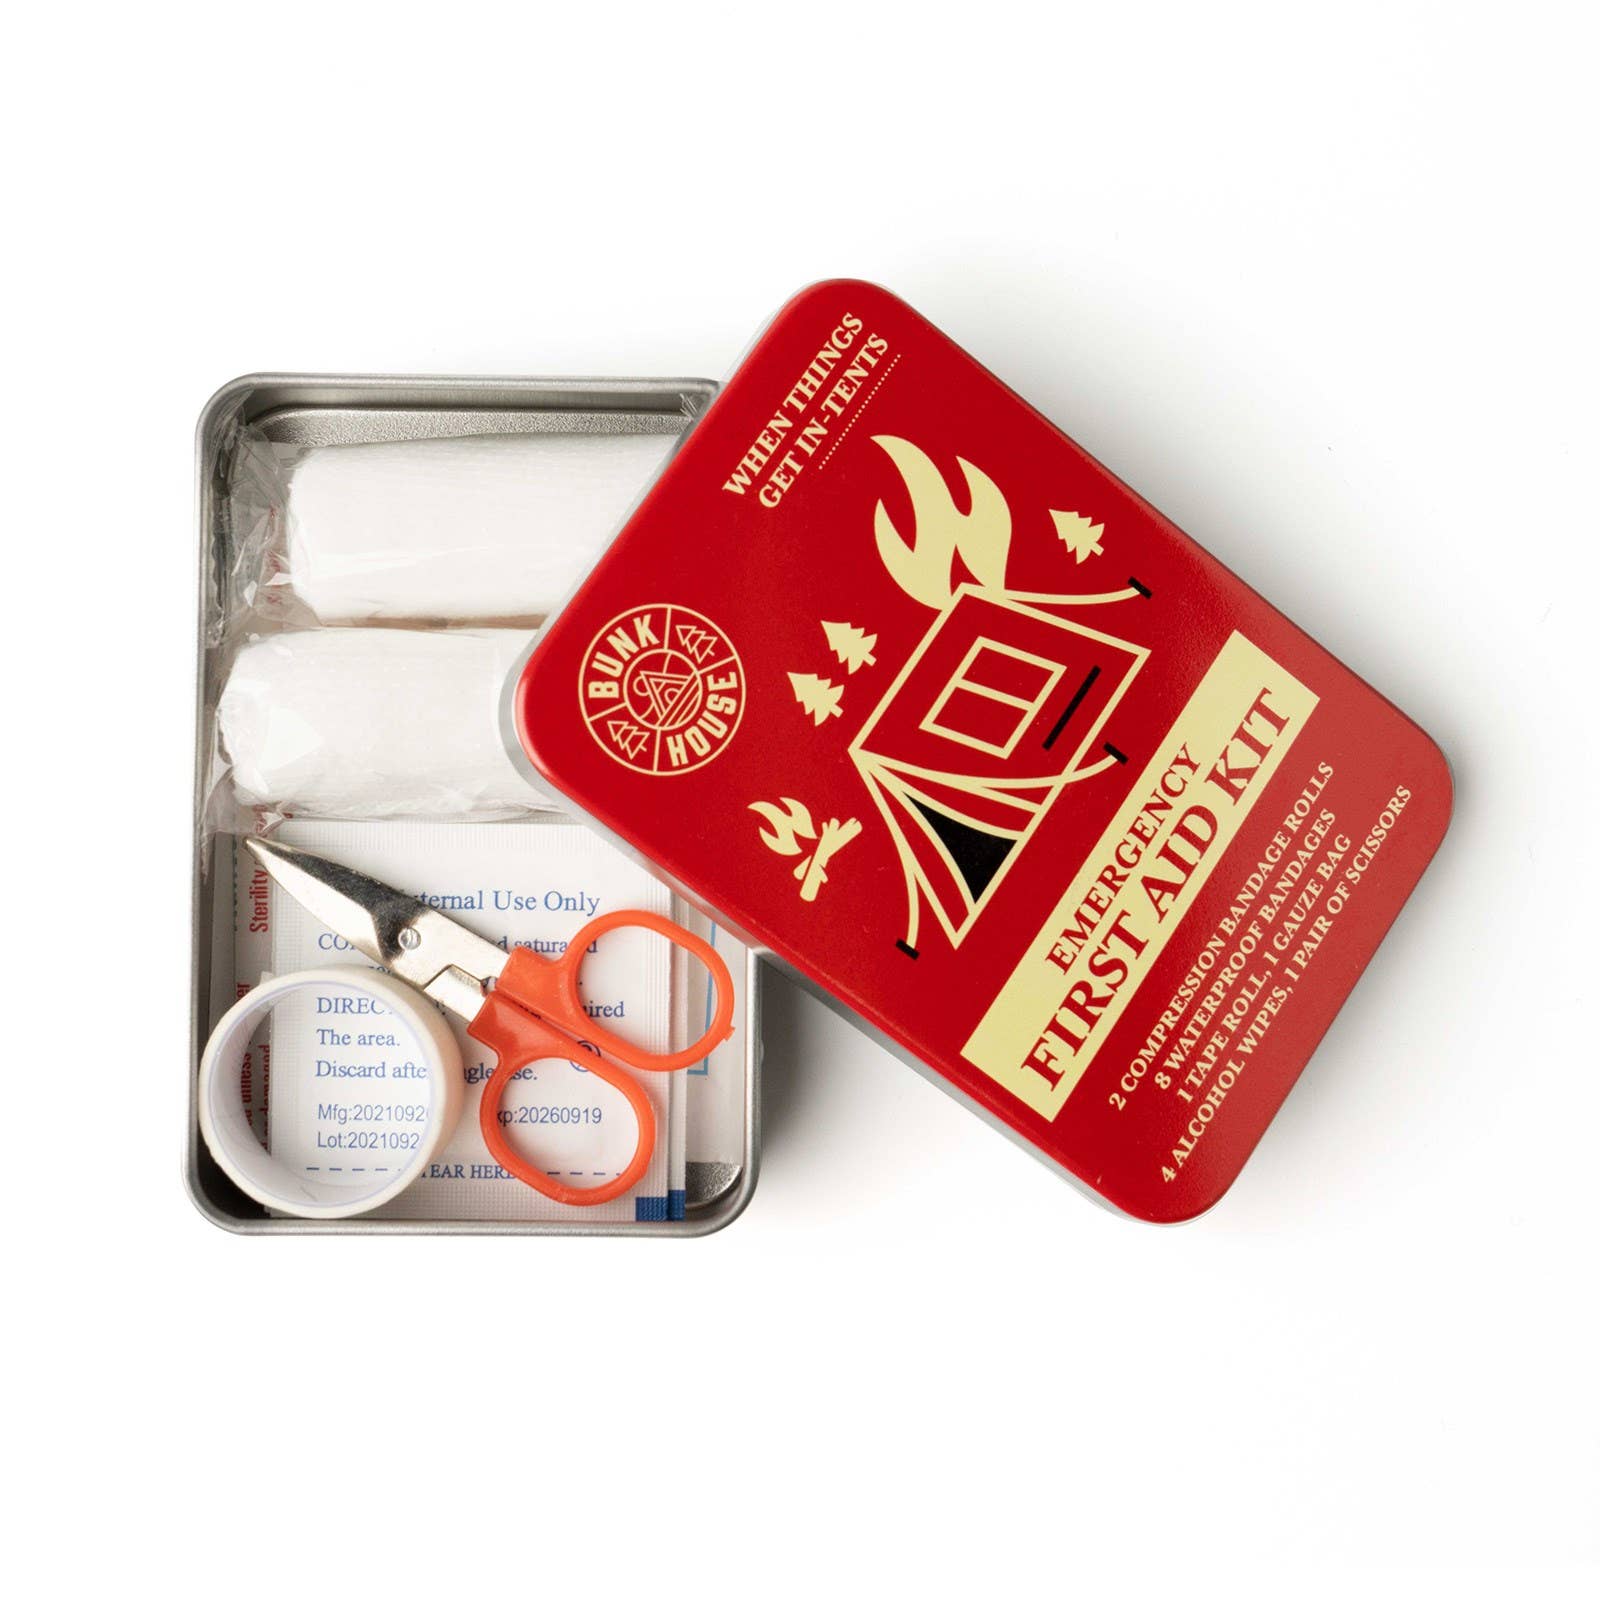 close up of an emergency first aid kit